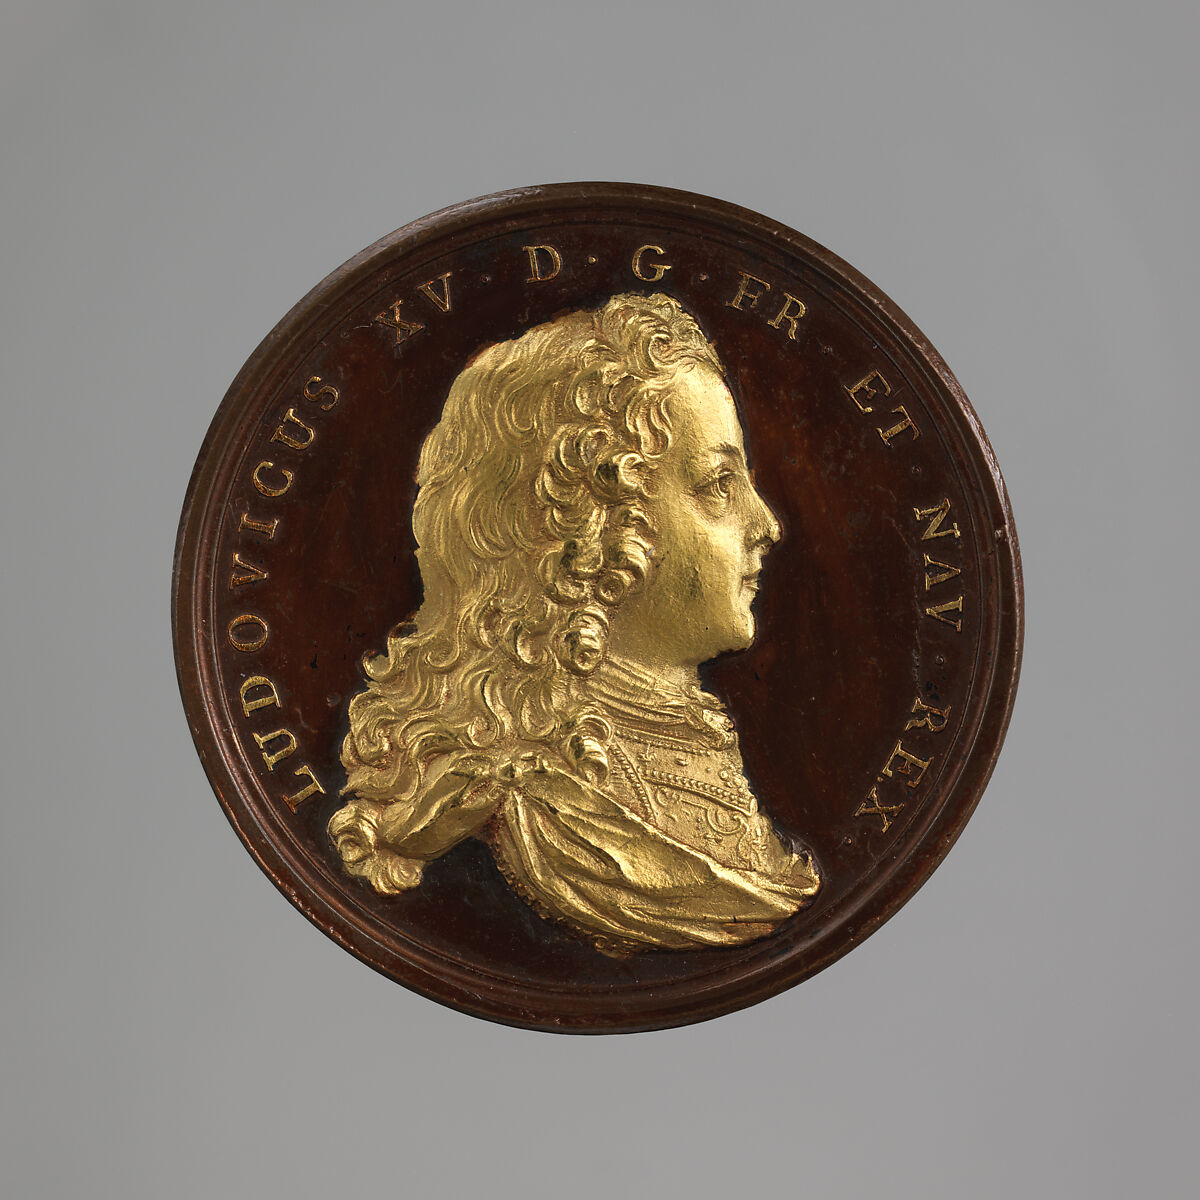 Louis XV: Education of the King, Jean Le Blanc (French, 1676/77–1749), Gilt bronze, lacquered ground, French, Paris 